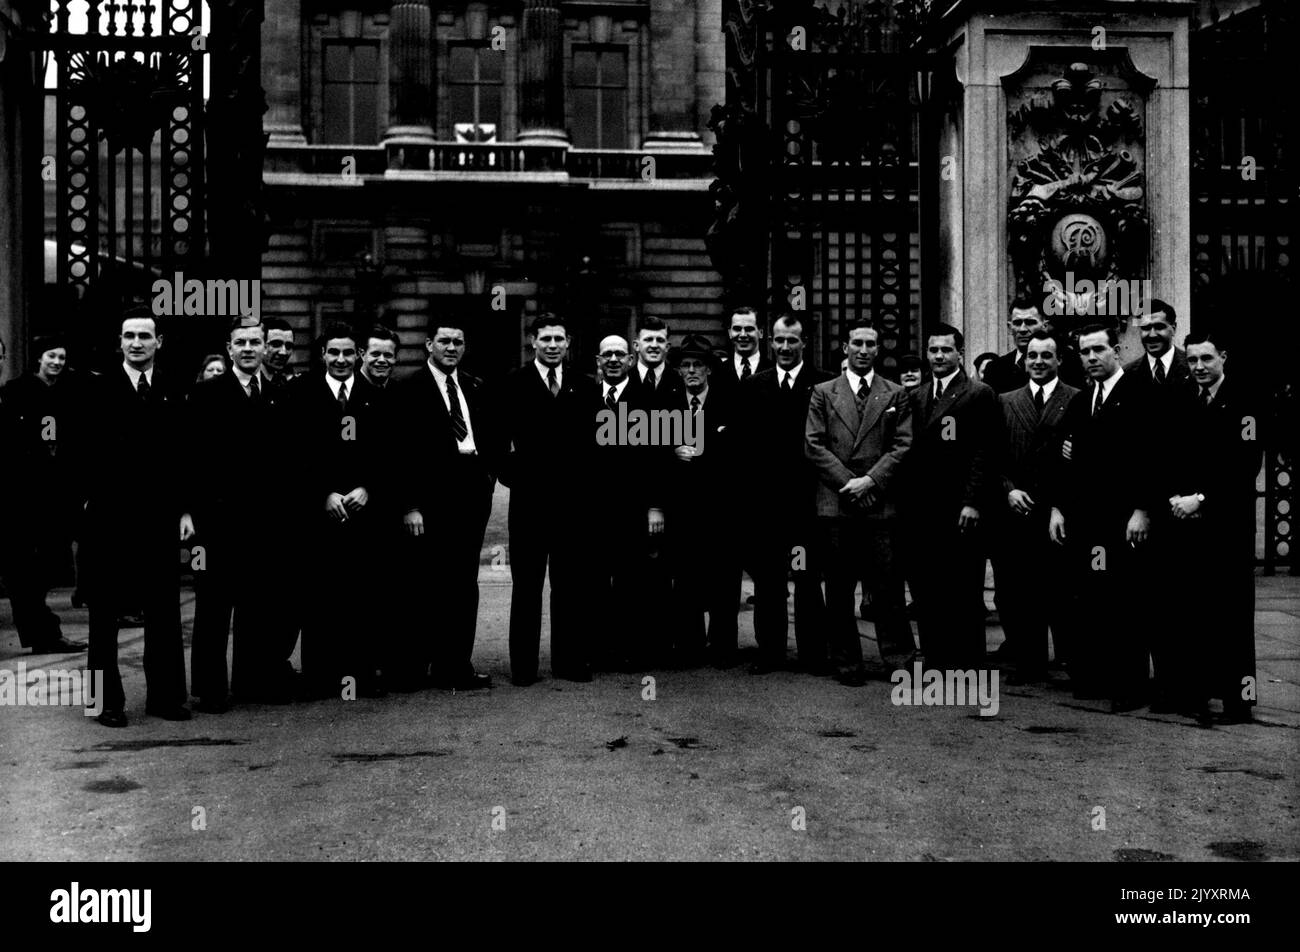 The Wallabies At The Palace -- Members of the Australian Rugby Union side-The Wallabies, pictured as they left Buckingham Palace after being received by the King and Queen this morning (Wednesday). Members of the Australian Rugby Union Football team visiting this country were received by Their Majesties the King and Queen at Buckingham Palace this morning (Wednesday). February 11, 1948. Stock Photo